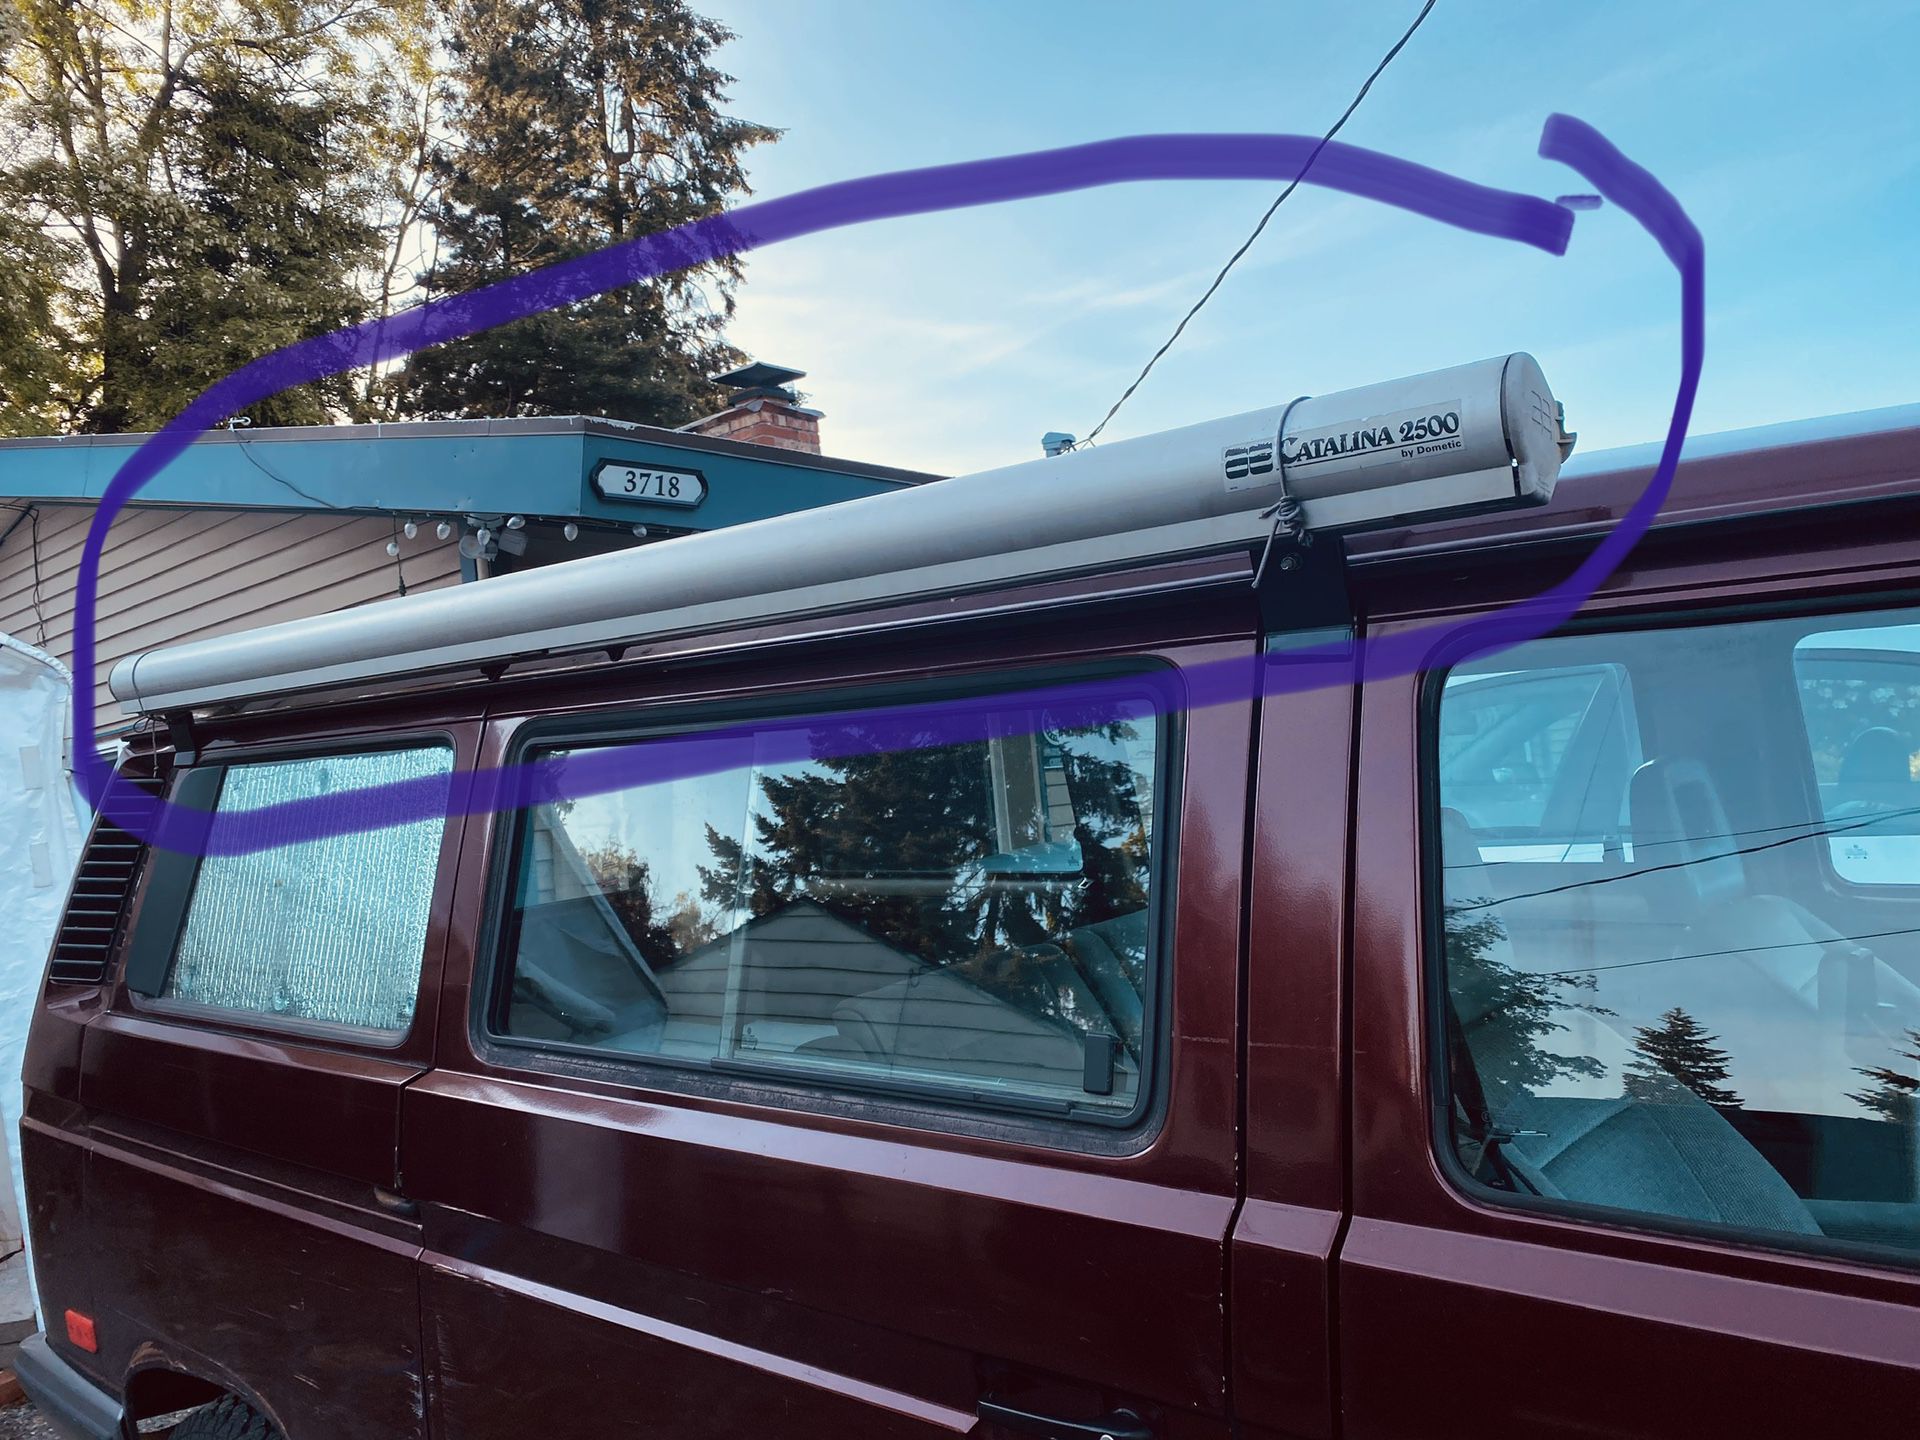 Catalina 2500 awning ( van not for sale)